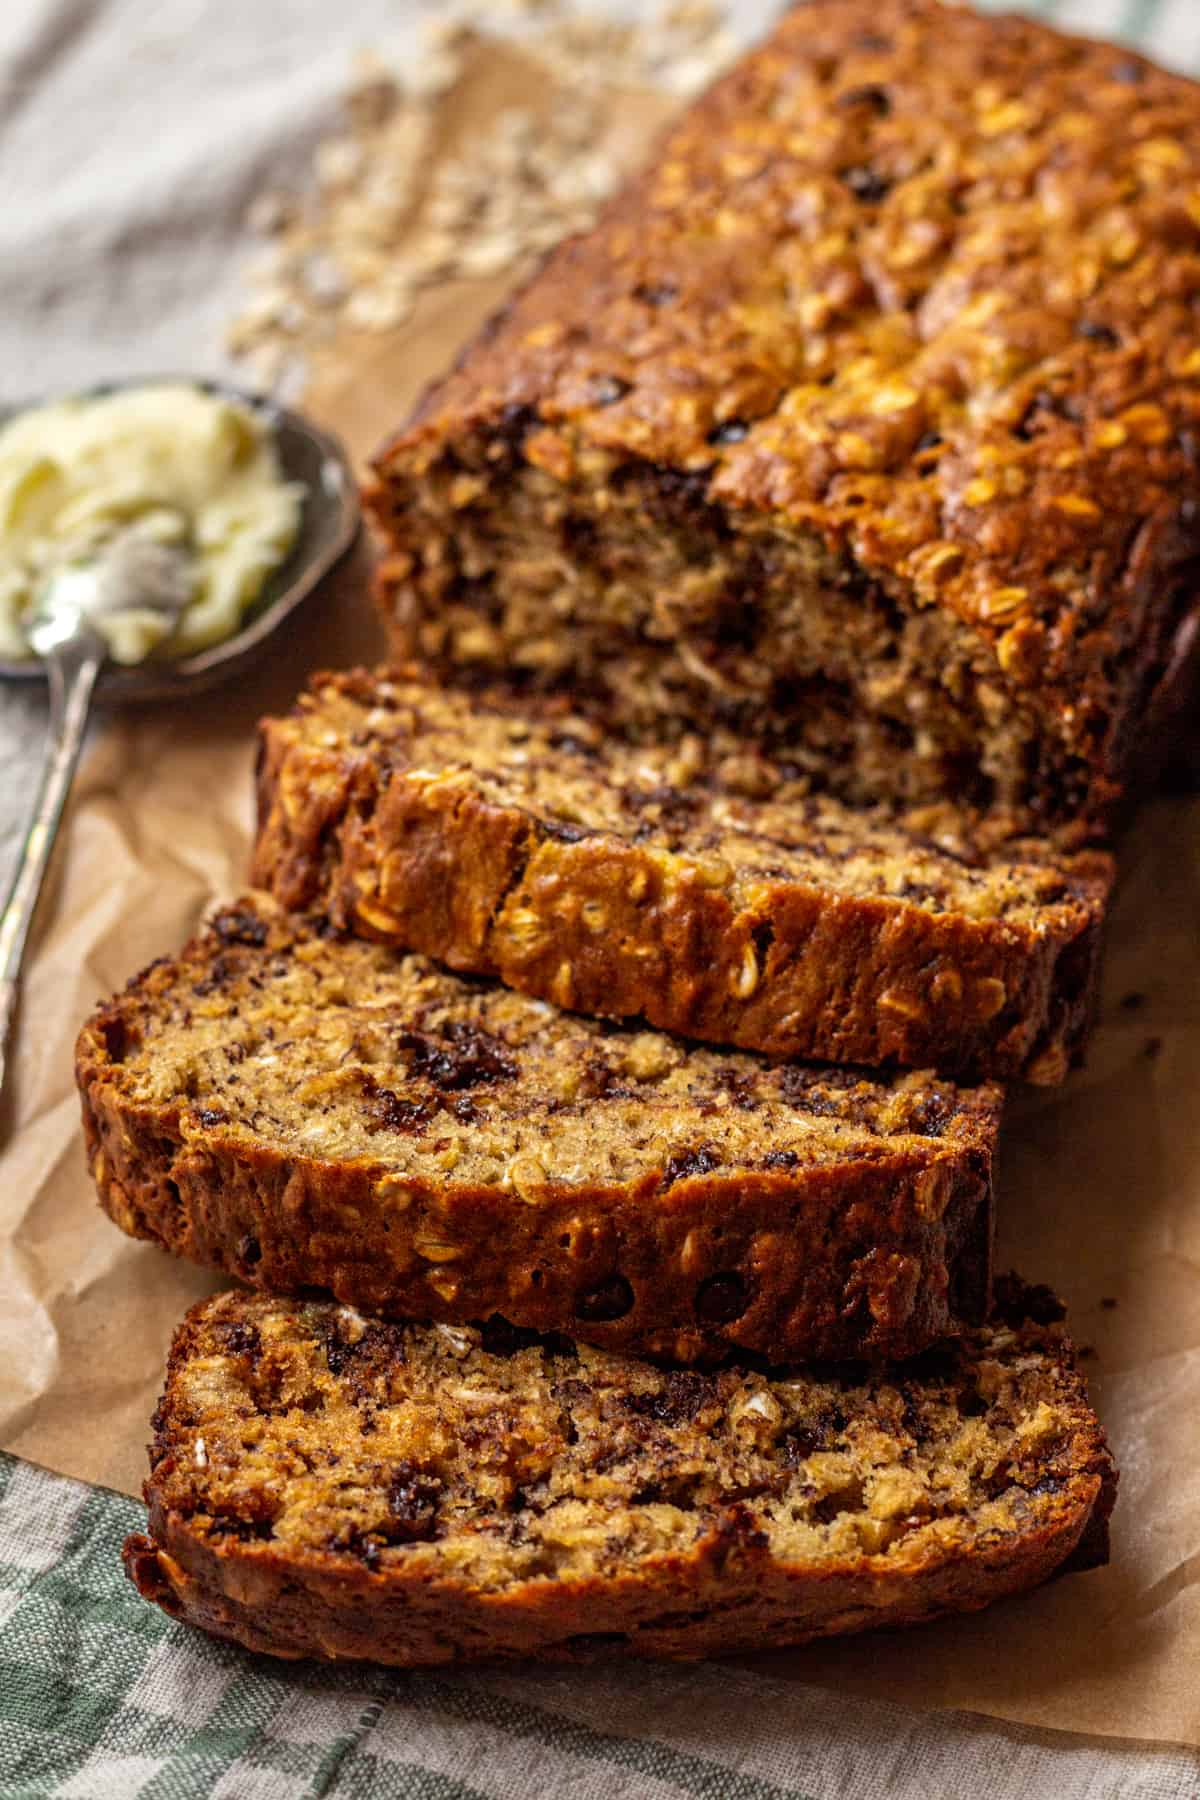 Sliced Oatmeal Banana Bread on parchment paper with a small dish or butter with a spoon.